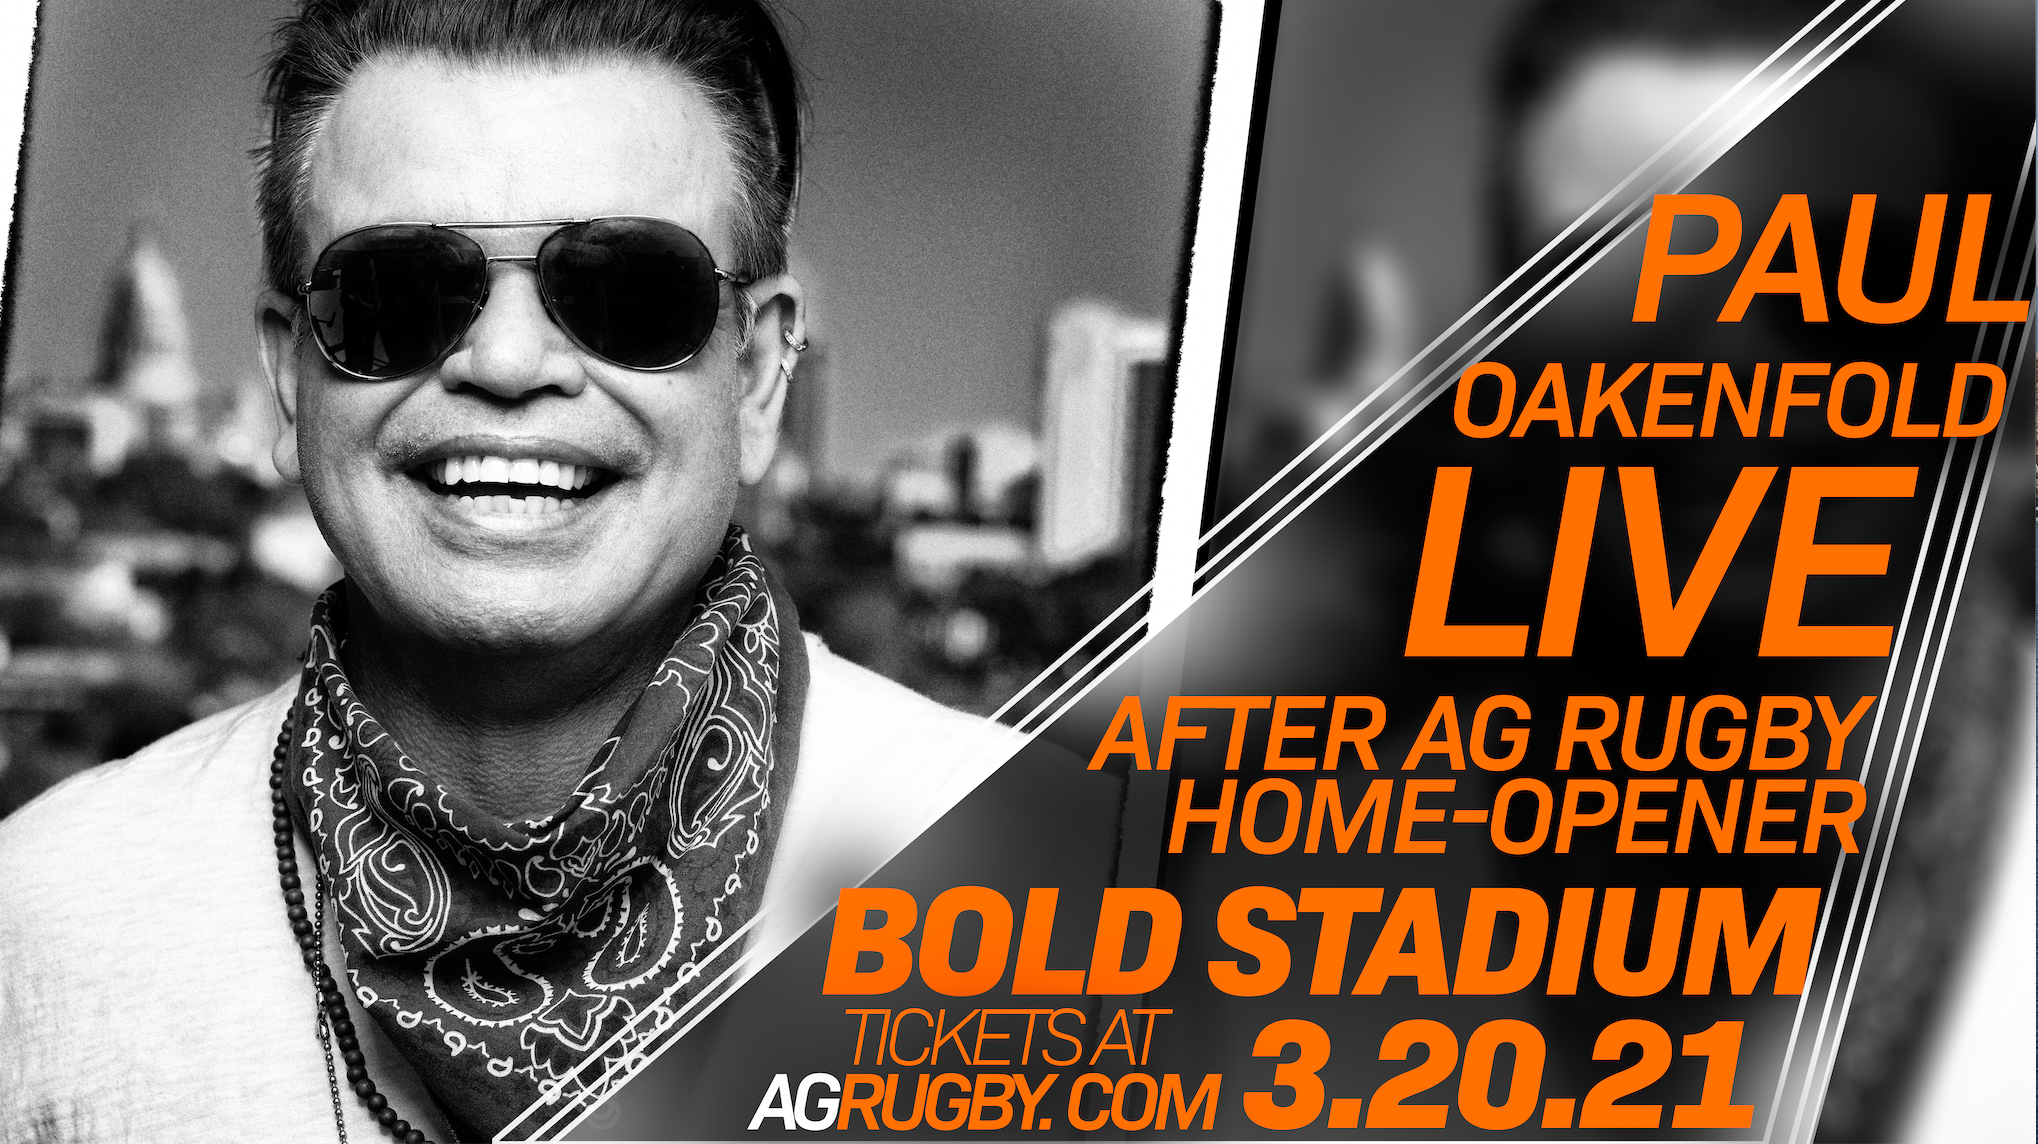 DJ Paul Oakenfold To Perform Live After AG Rugby Home Opener